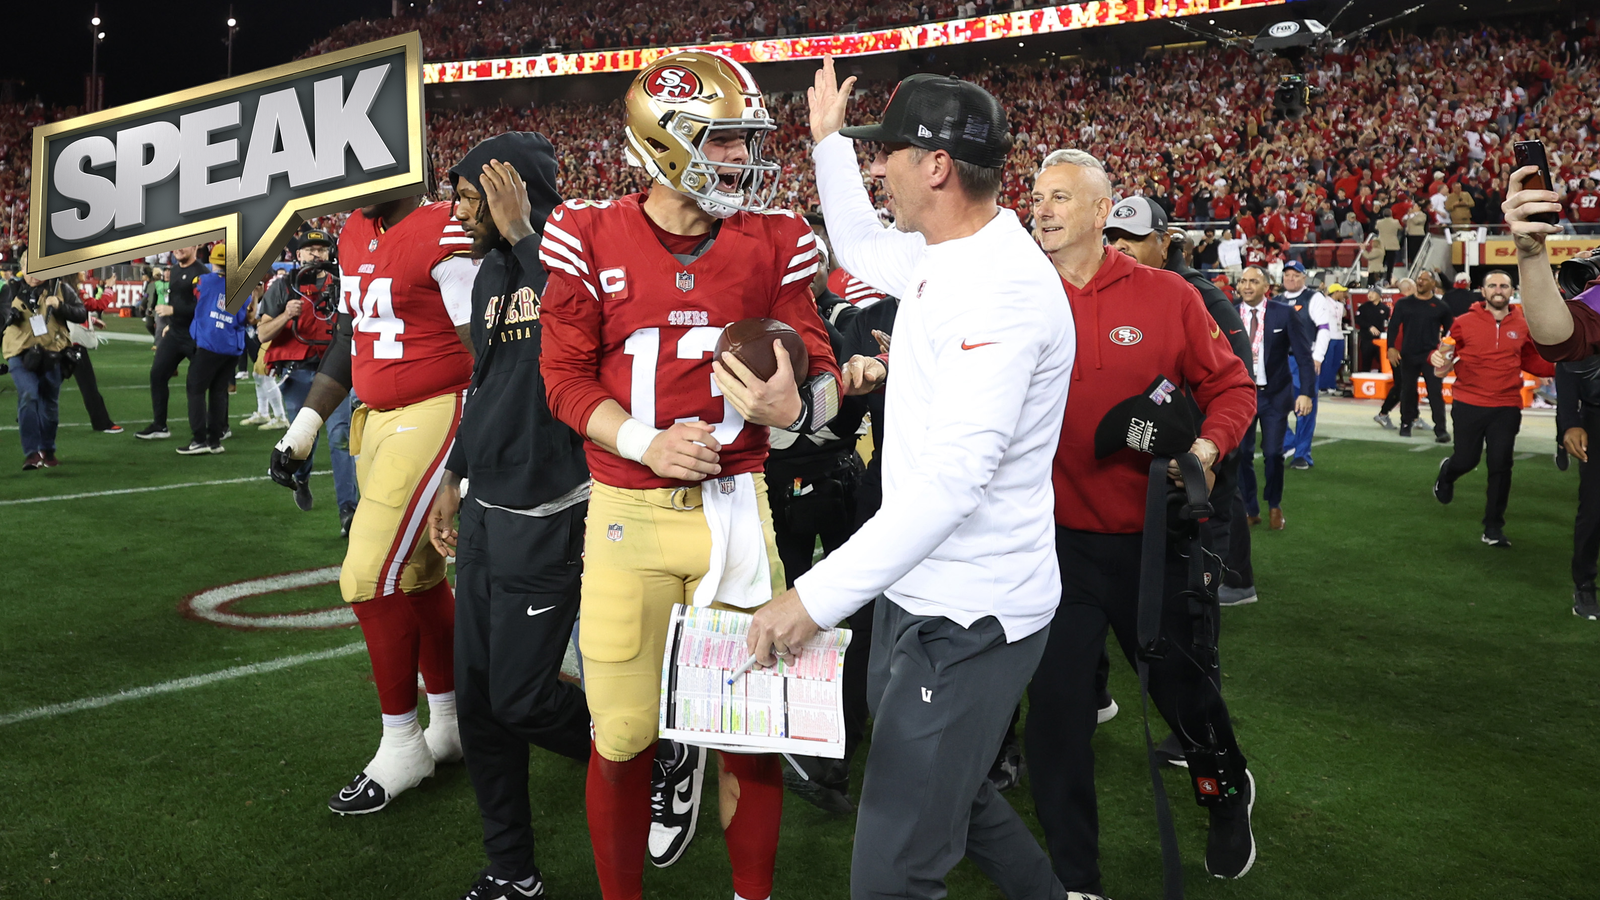 Would Brock Purdy or Kyle Shanahan benefit more from a Super Bowl win?